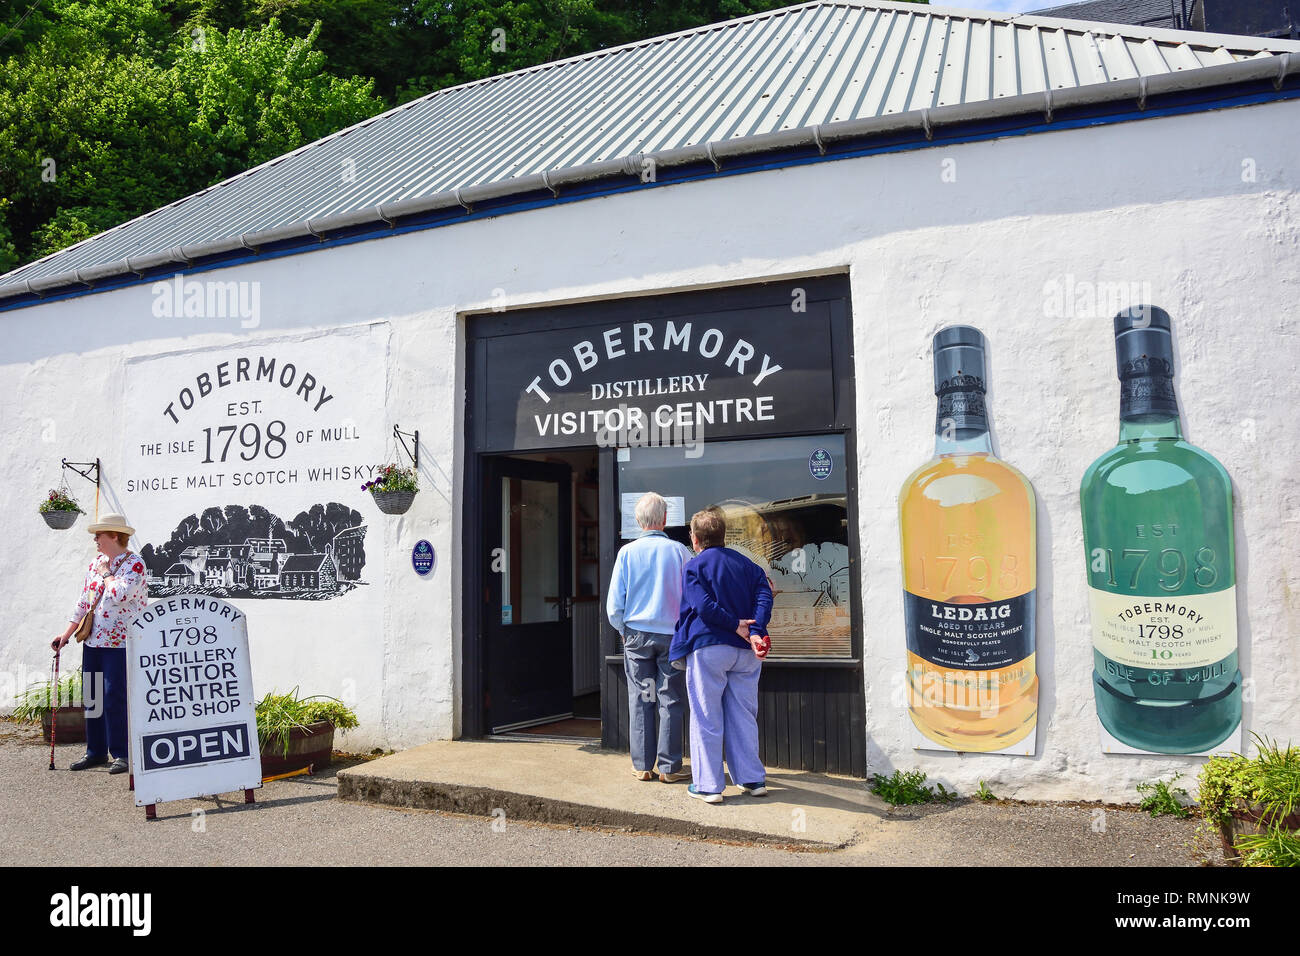 Entrance to Tobermory Distillery Visitor Centre and shop, Ledaig, Tobermory, Isle of Mull, Inner Hebrides, Argyll and Bute, Scotland, United Kingdom Stock Photo